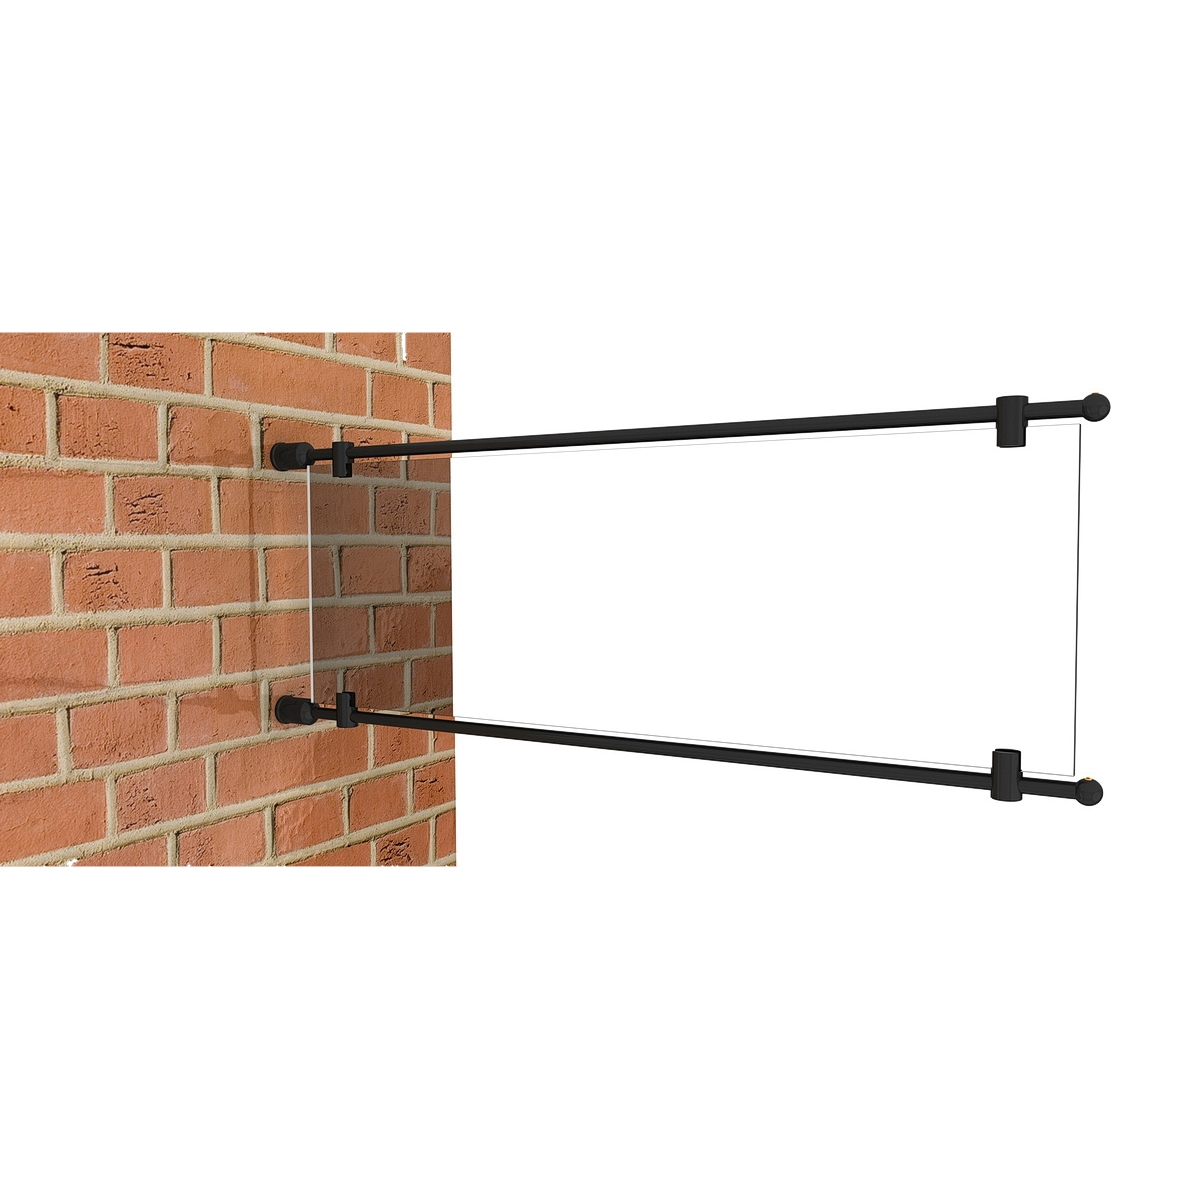 Set of 2, 3/8'' Diameter Rod Projecting Sign, Aluminum Black Matte Anodized, 25-13/16''. Material thickness up to 5/16''